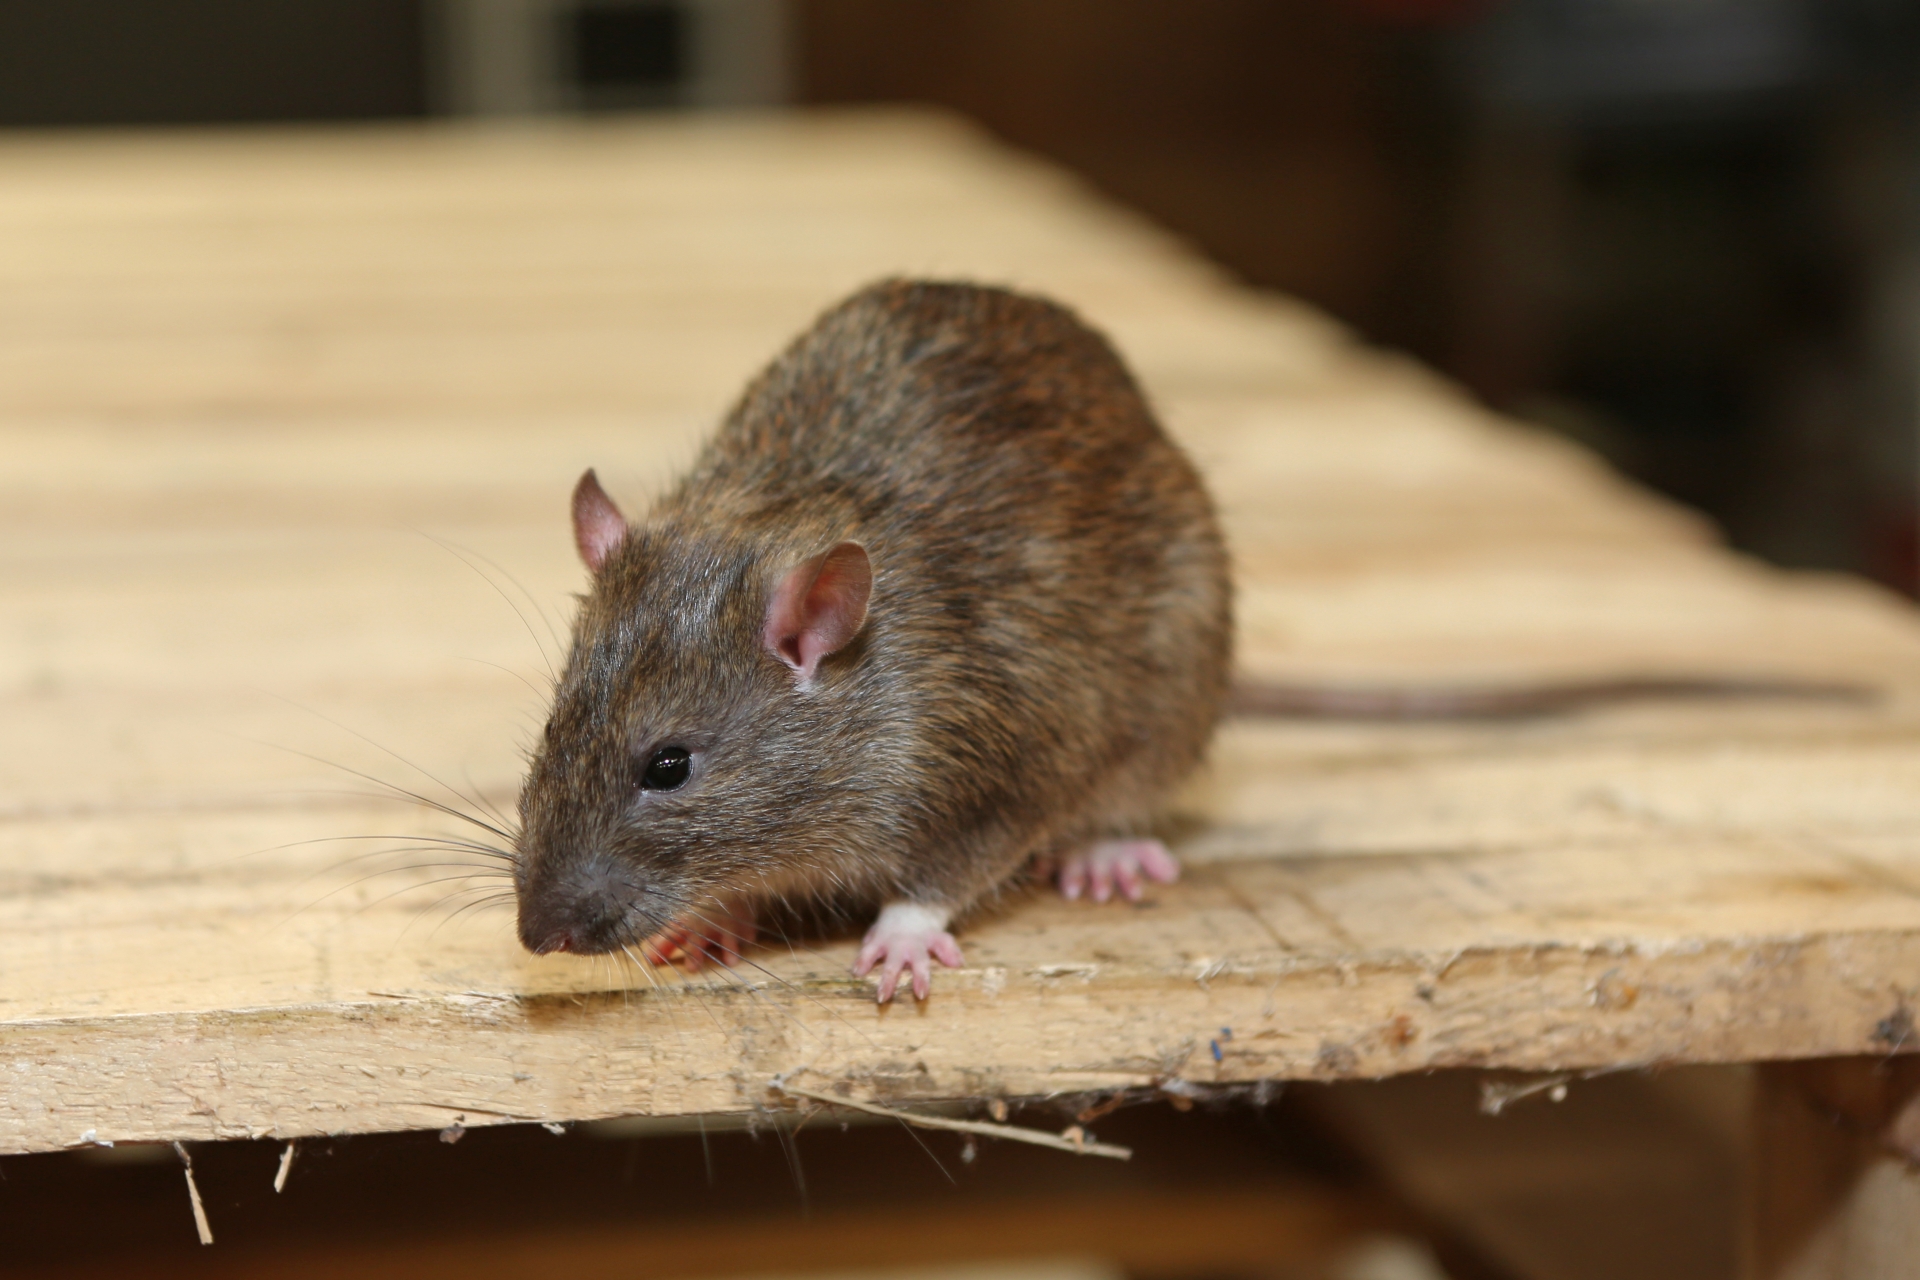 Rat Control, Pest Control in Notting Hill, W11. Call Now 020 8166 9746